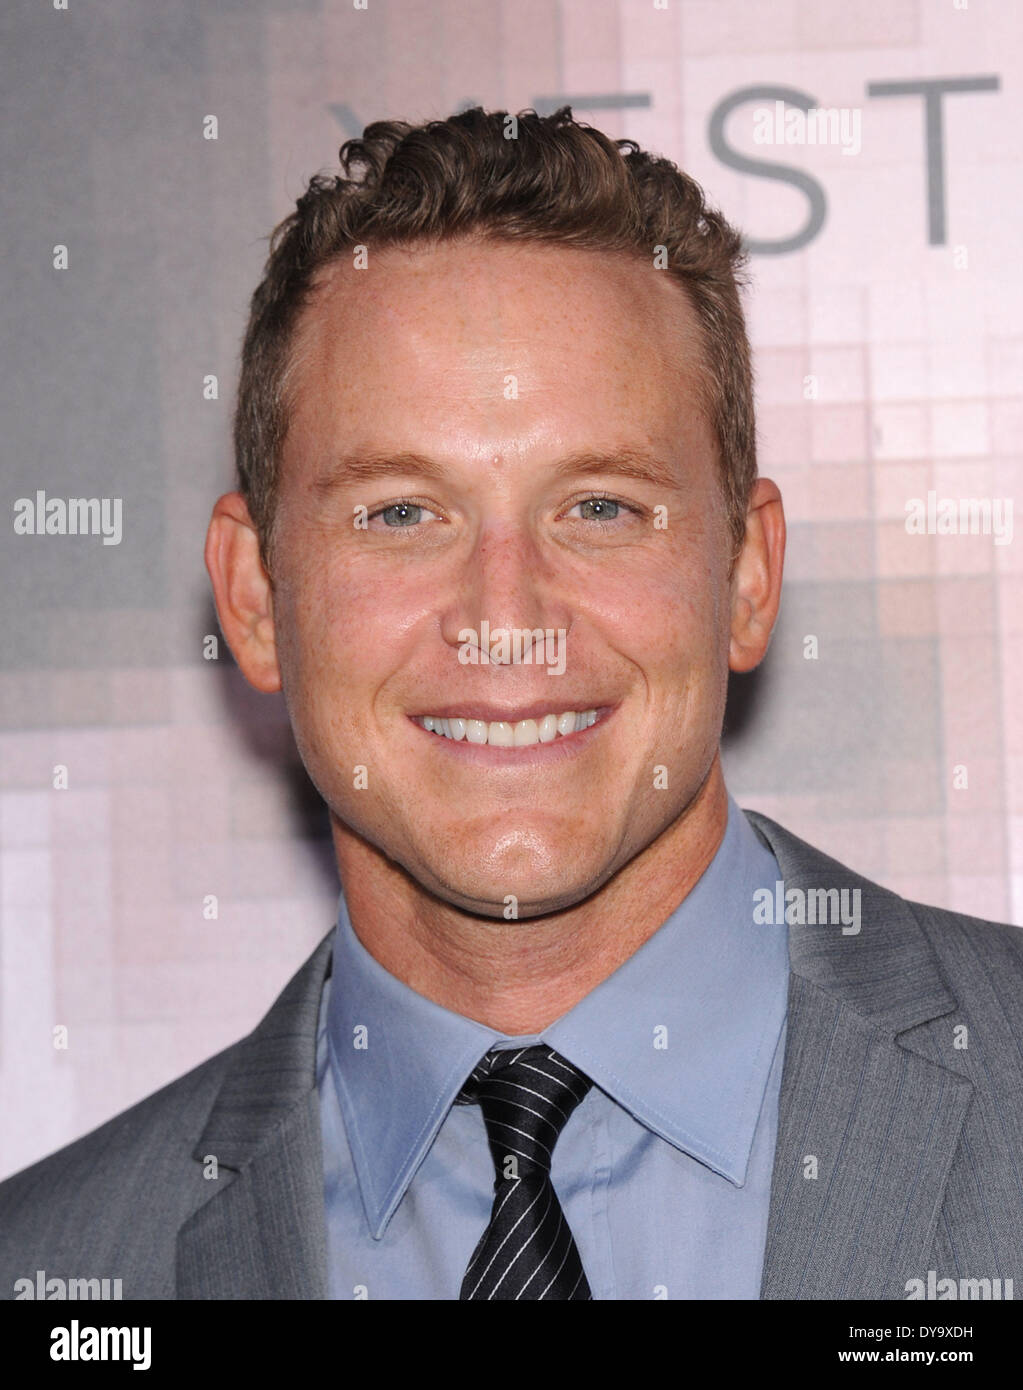 Westwood, California, USA. 10th Apr, 2014. Cole Hauser arrives for the premiere of the film 'Transcendence' at the Village theater. Credit:  Lisa O'Connor/ZUMAPRESS.com/Alamy Live News Stock Photo